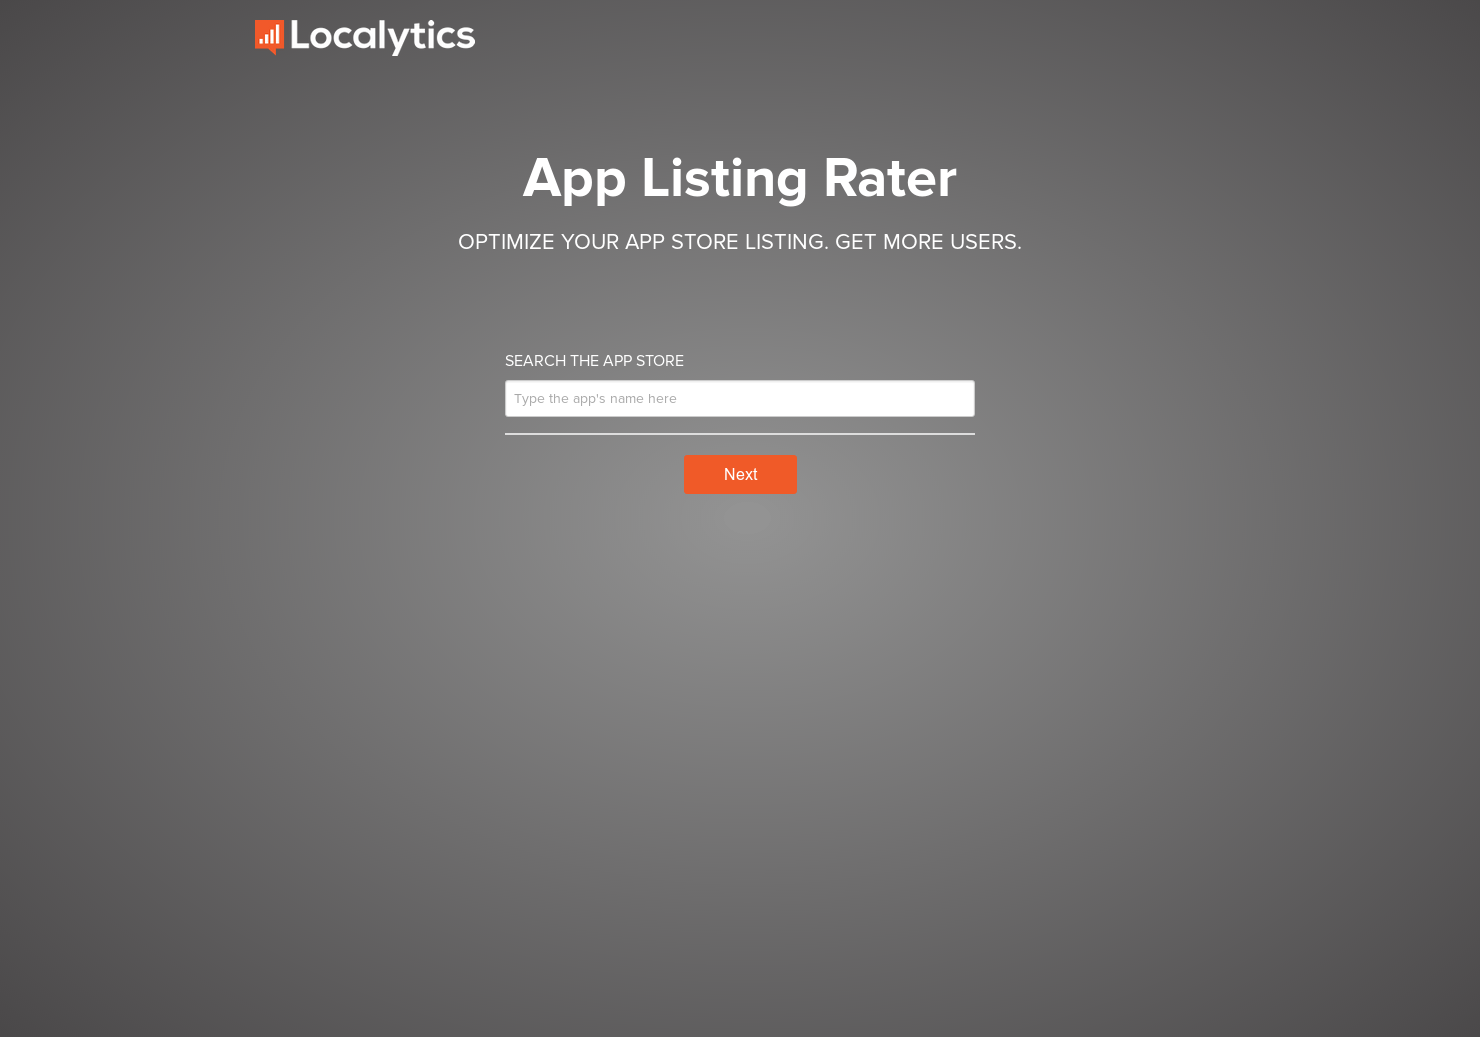 App Listing Rater